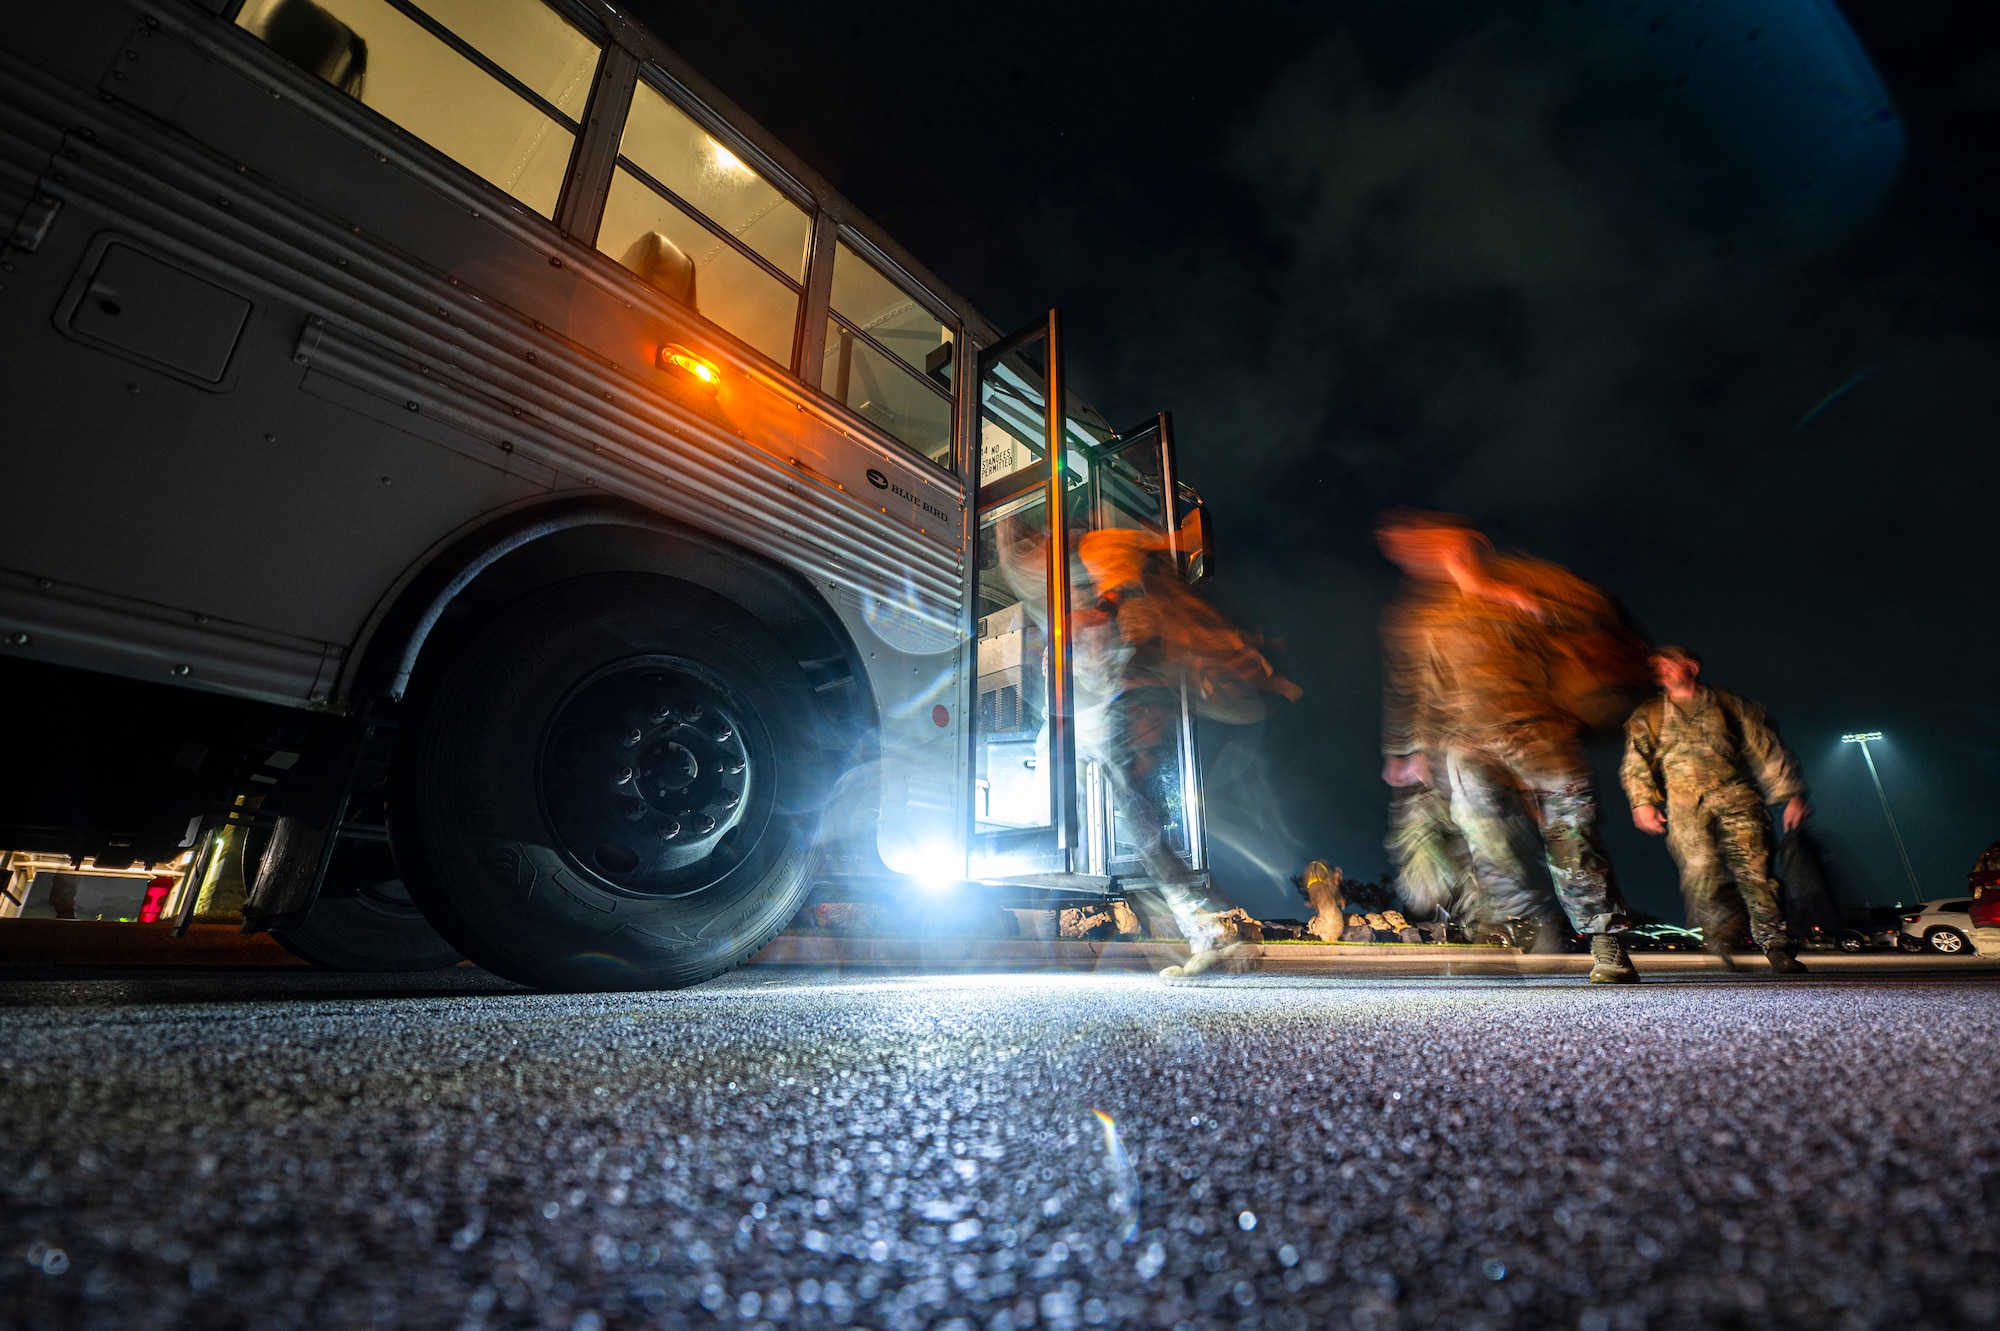 U.S. Air Force Airmen assigned to the 822nd Base Defense Squadron board a shuttle to be transported to the deployment control center at Moody Air Force Base, Georgia, Aug. 29, 2021. The 822nd BDS were tasked to provide an enhanced security presence at Holloman Air Force Base, New Mexico in support of Task Force – Holloman. The Department of Defense, through U.S. Northern Command, and in support of the Department of Homeland Security, is providing transportation, temporary housing, medical screening, and general support for at least 50,000 Afghan evacuees at suitable facilities, in permanent or temporary structures, as quickly as possible. This initiative provides Afghan personnel essential support at secure locations outside Afghanistan. (U.S. Air Force photo by Staff Sgt. Devin Boyer)